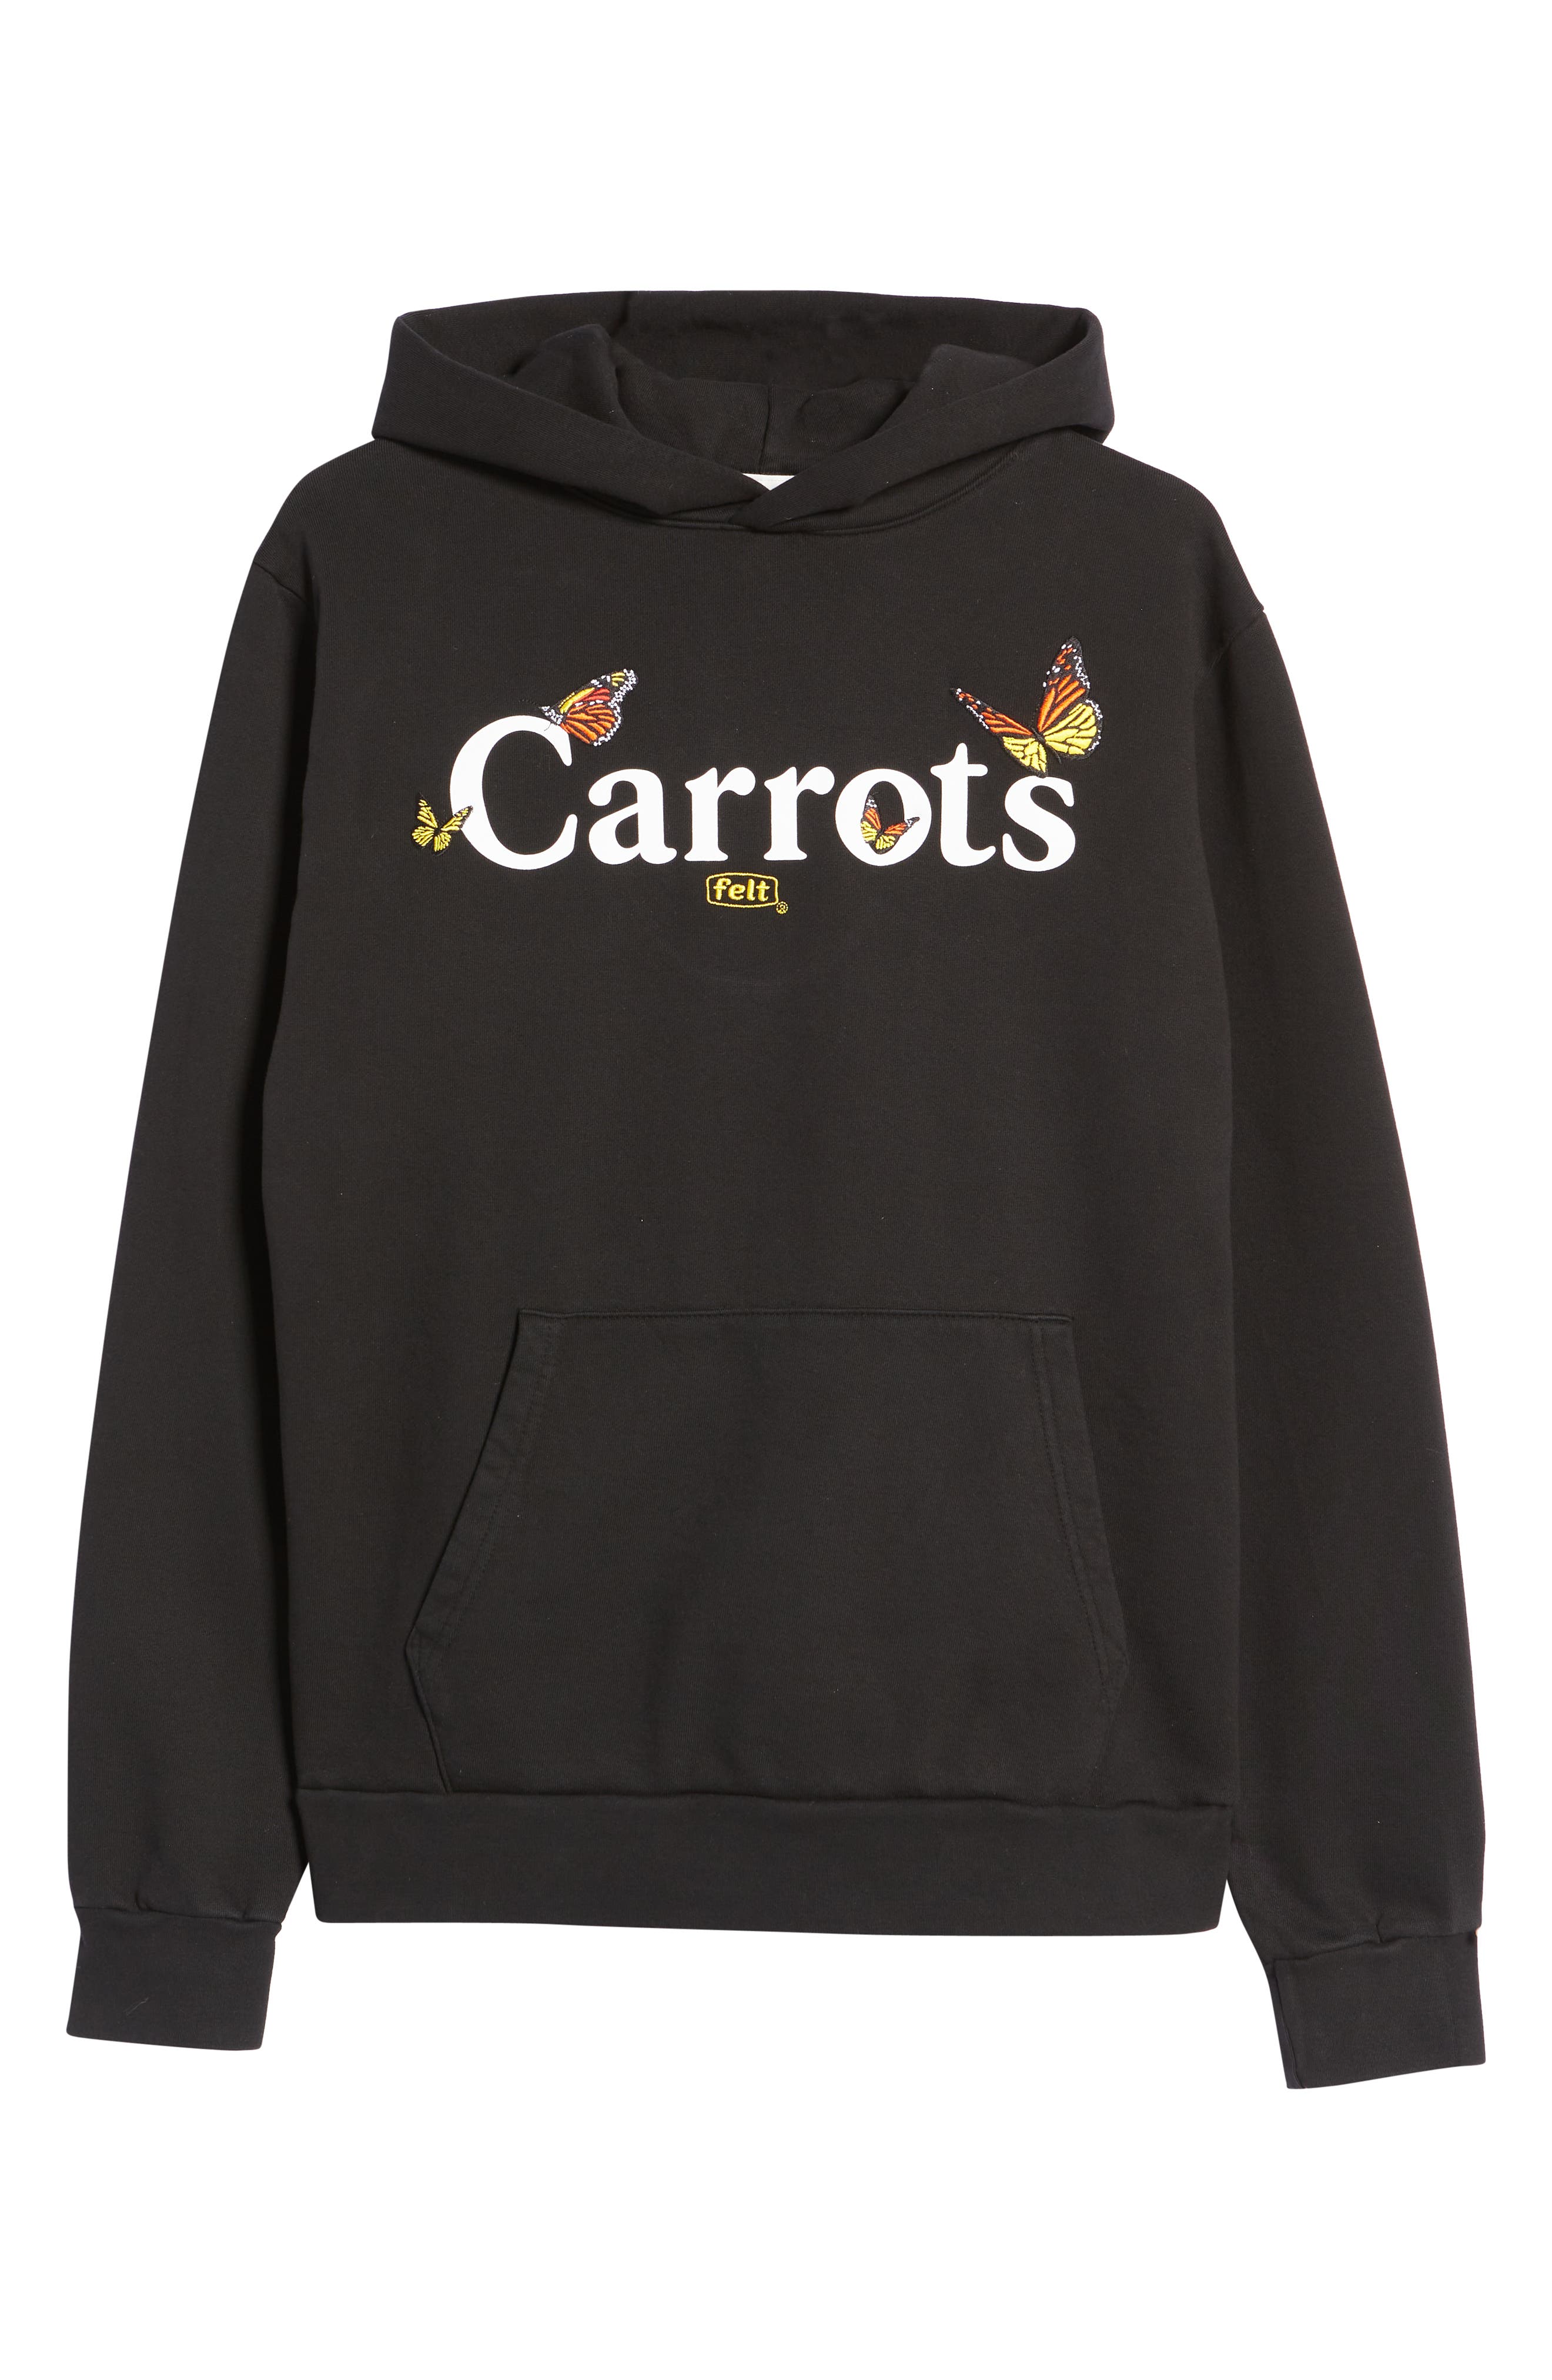 Carrots x Felt Butterfly Embroidered Hoodie Black Men's - FW21 - US